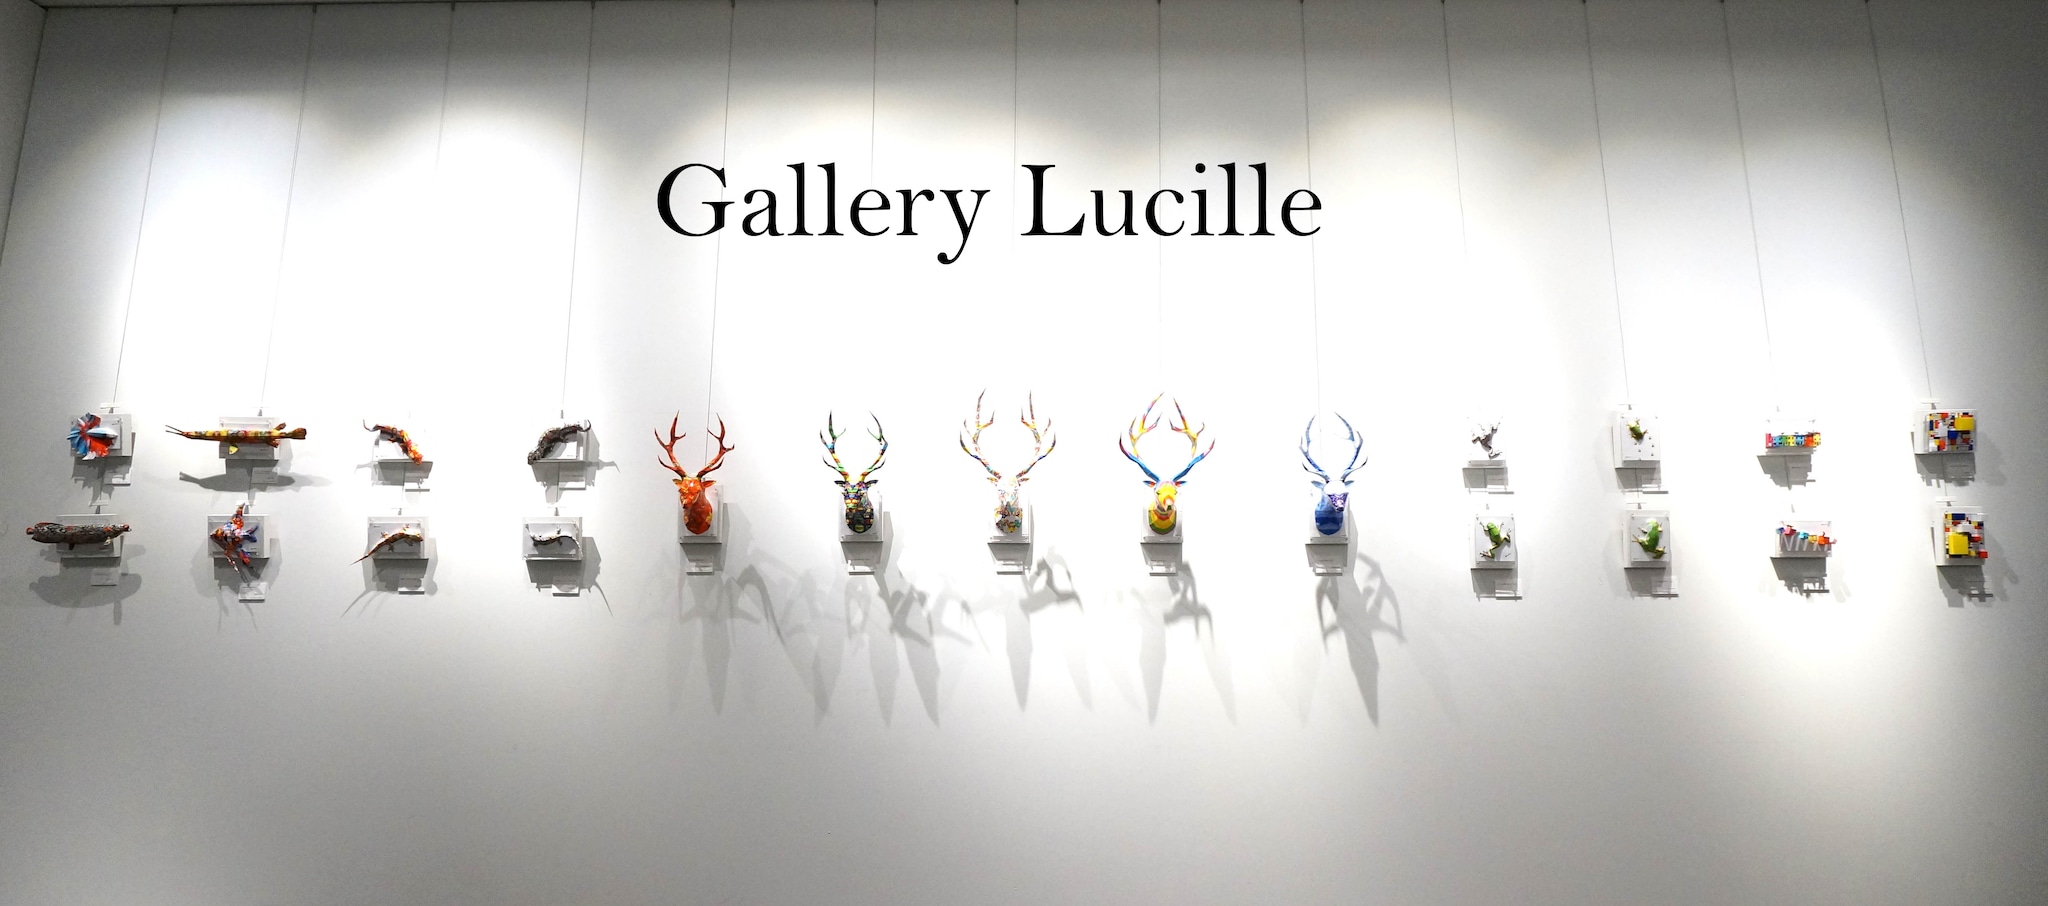 Gallery Lucille